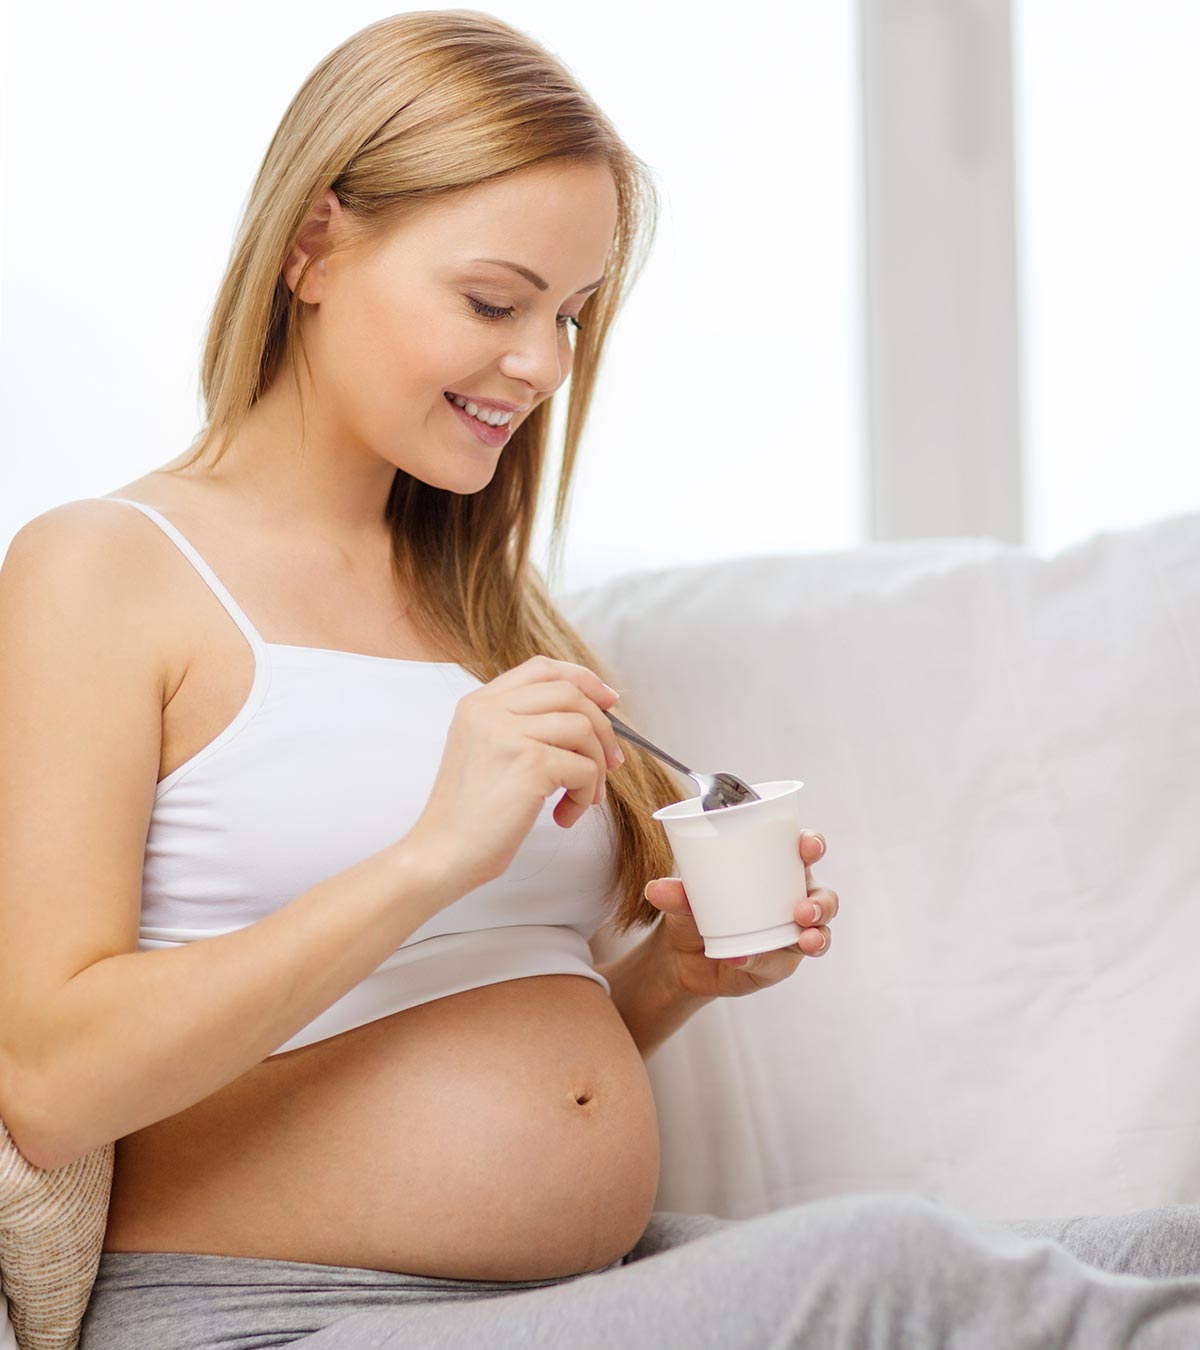 Is It Safe To Eat Yogurt During Pregnancy?